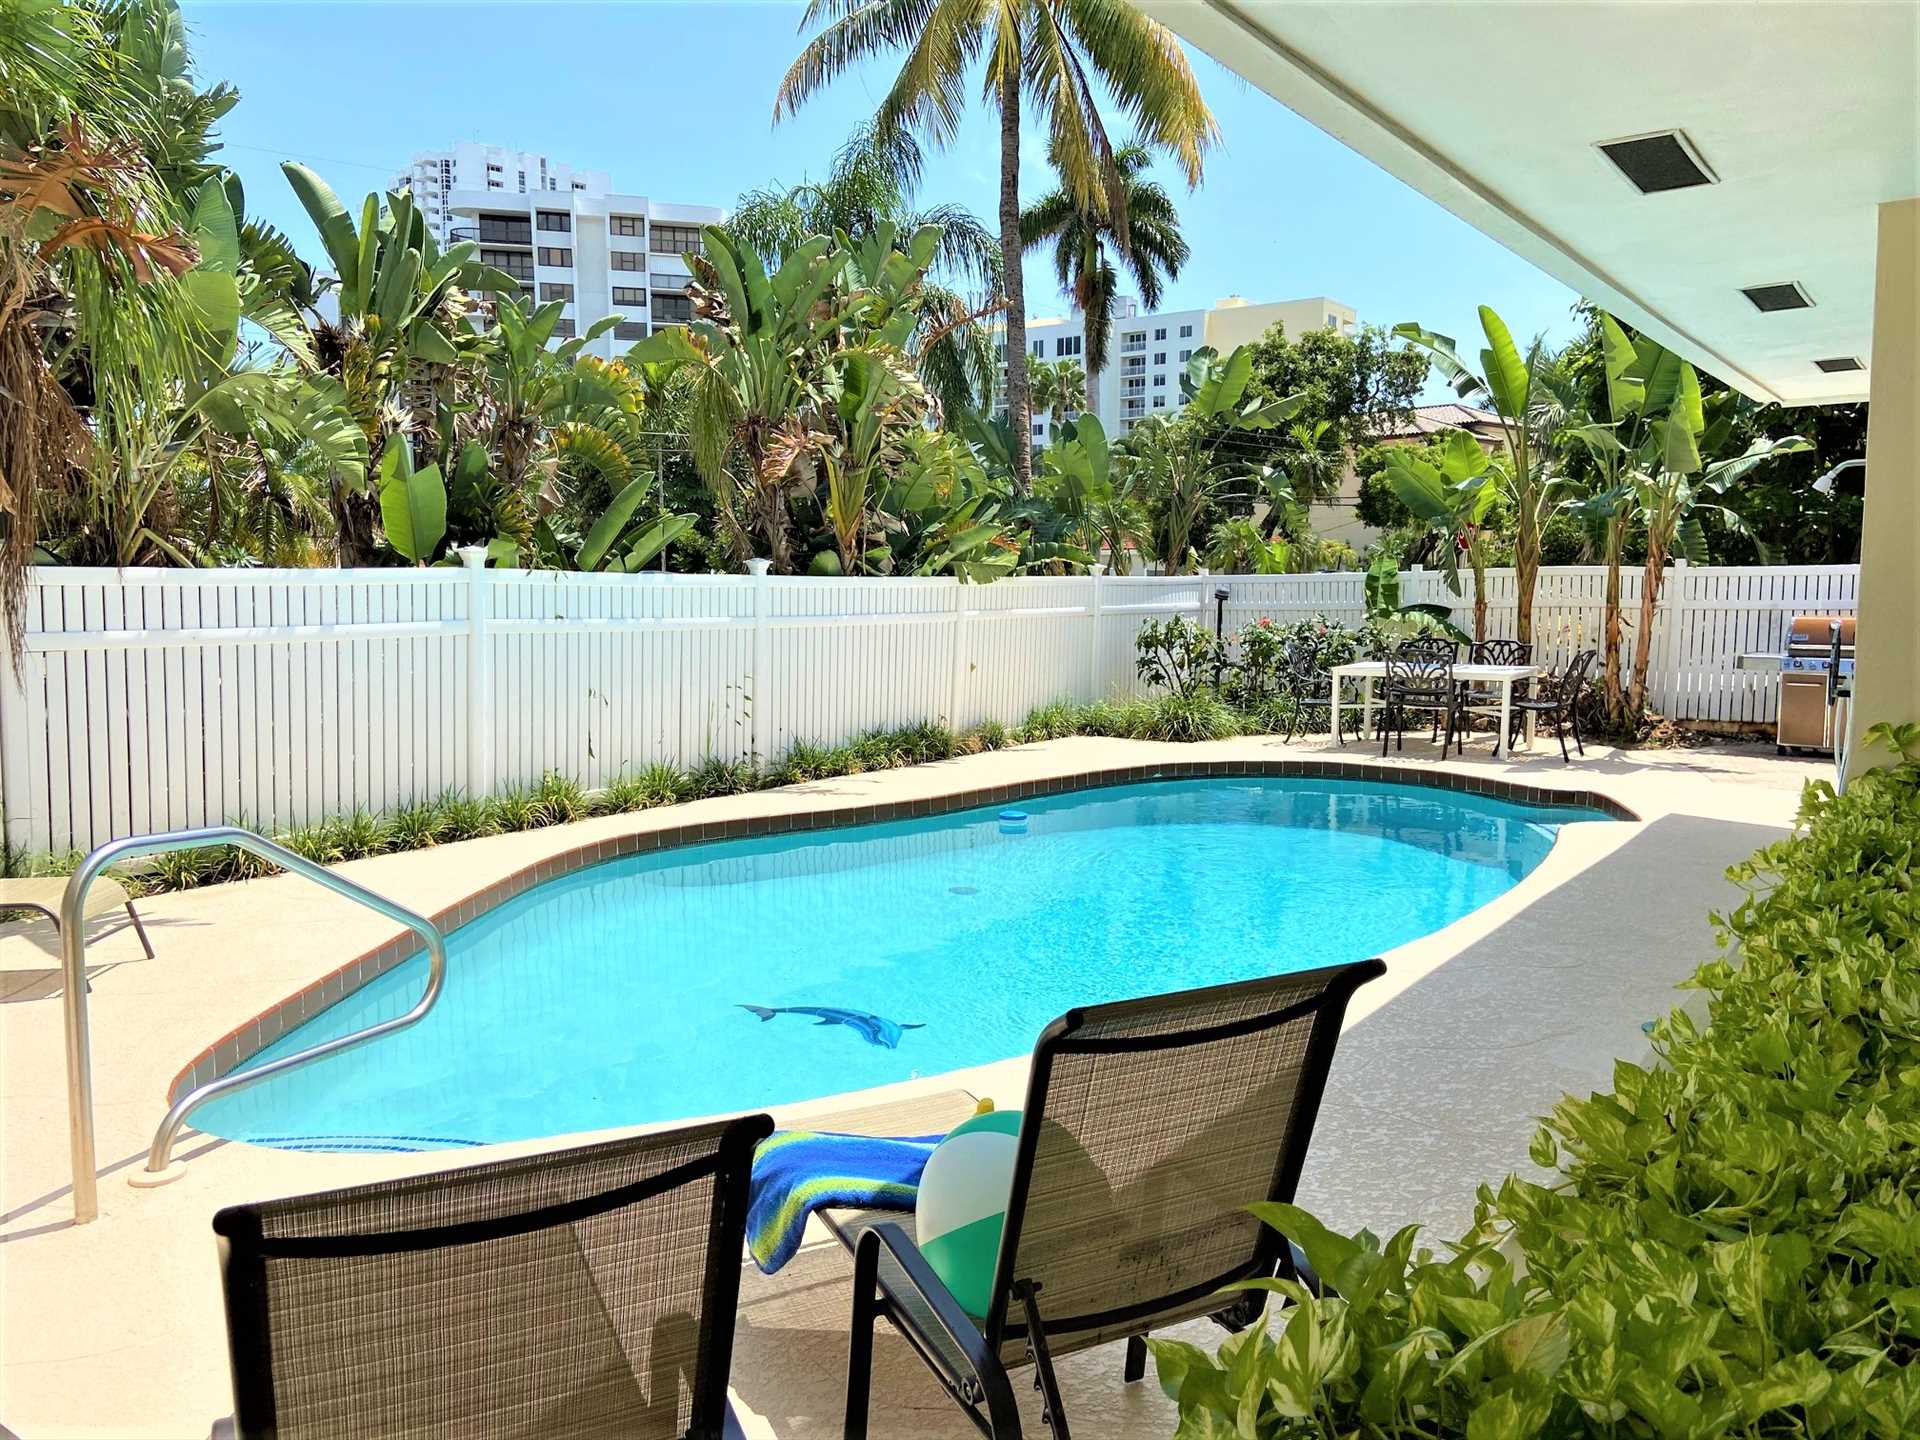 Pool deck is surrounded by a privacy fence.